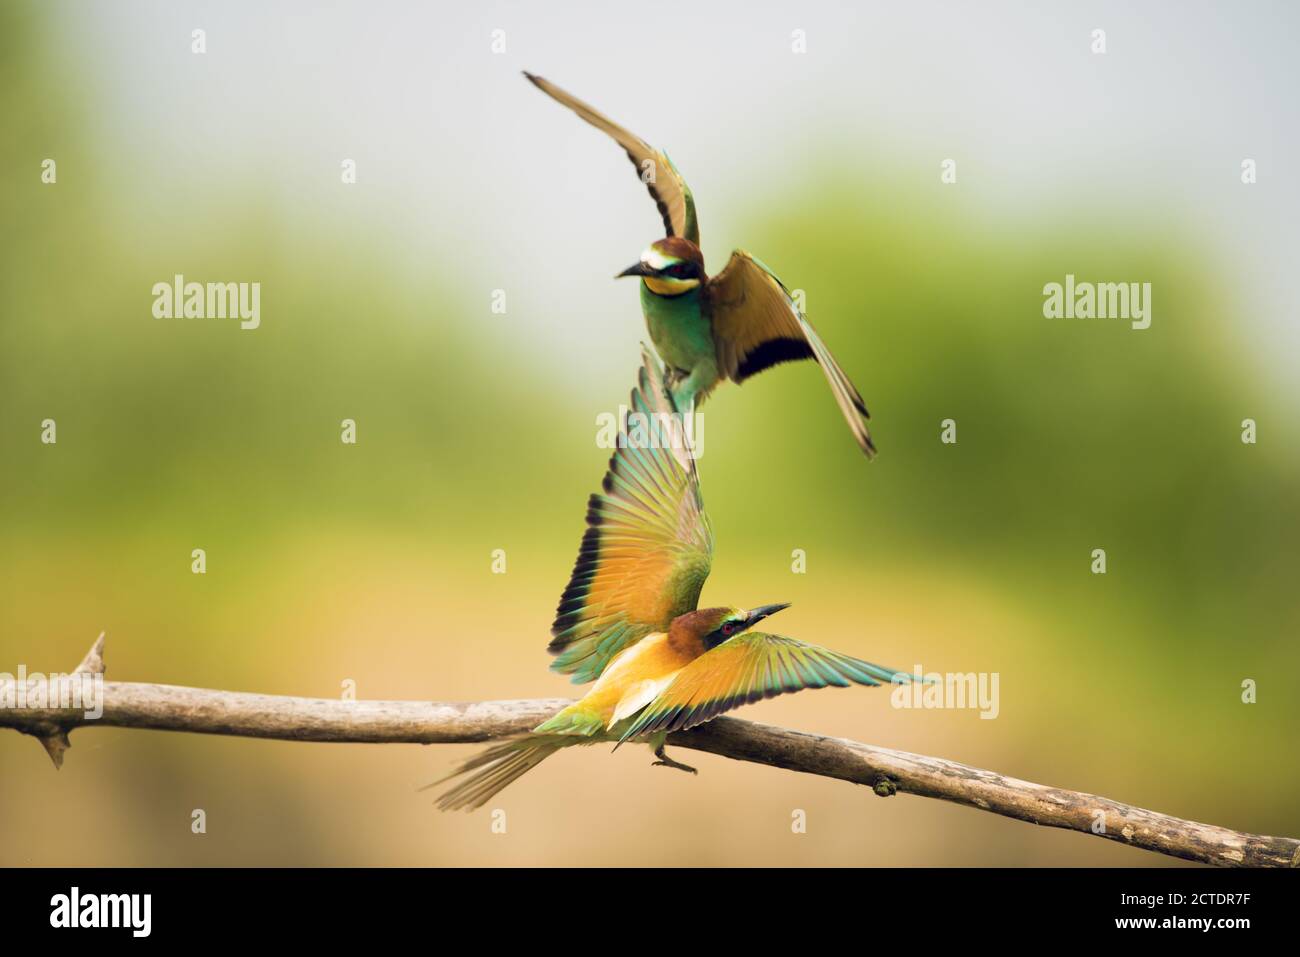 Merops apiaster, European bee-eaters are seriously debating the best site to build their nest. Stock Photo